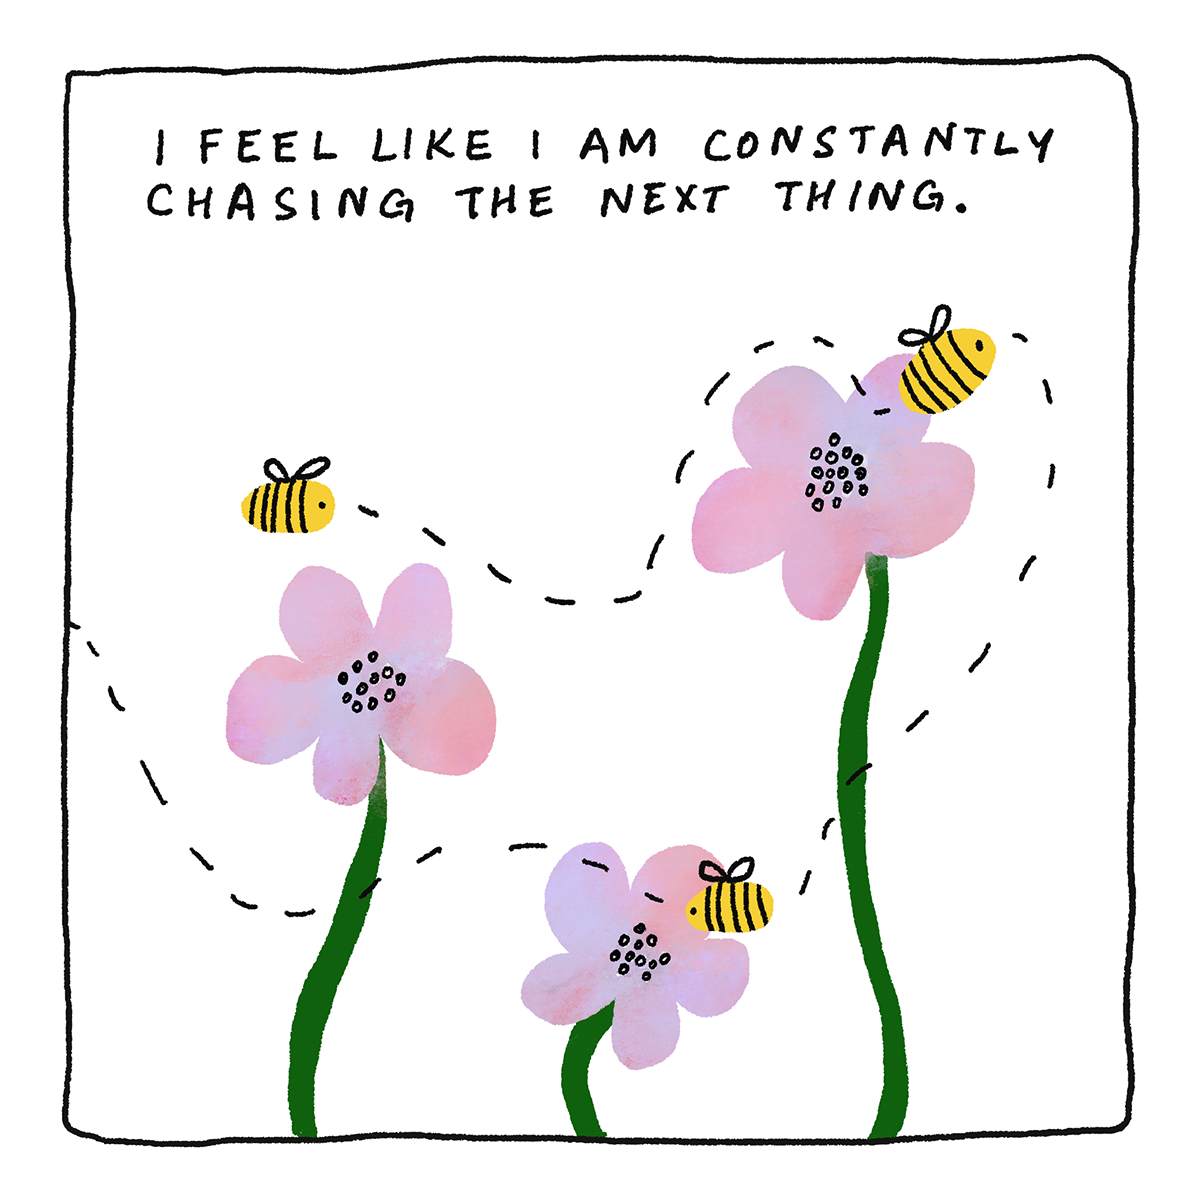 I feel like I am constantly chasing the next thing.